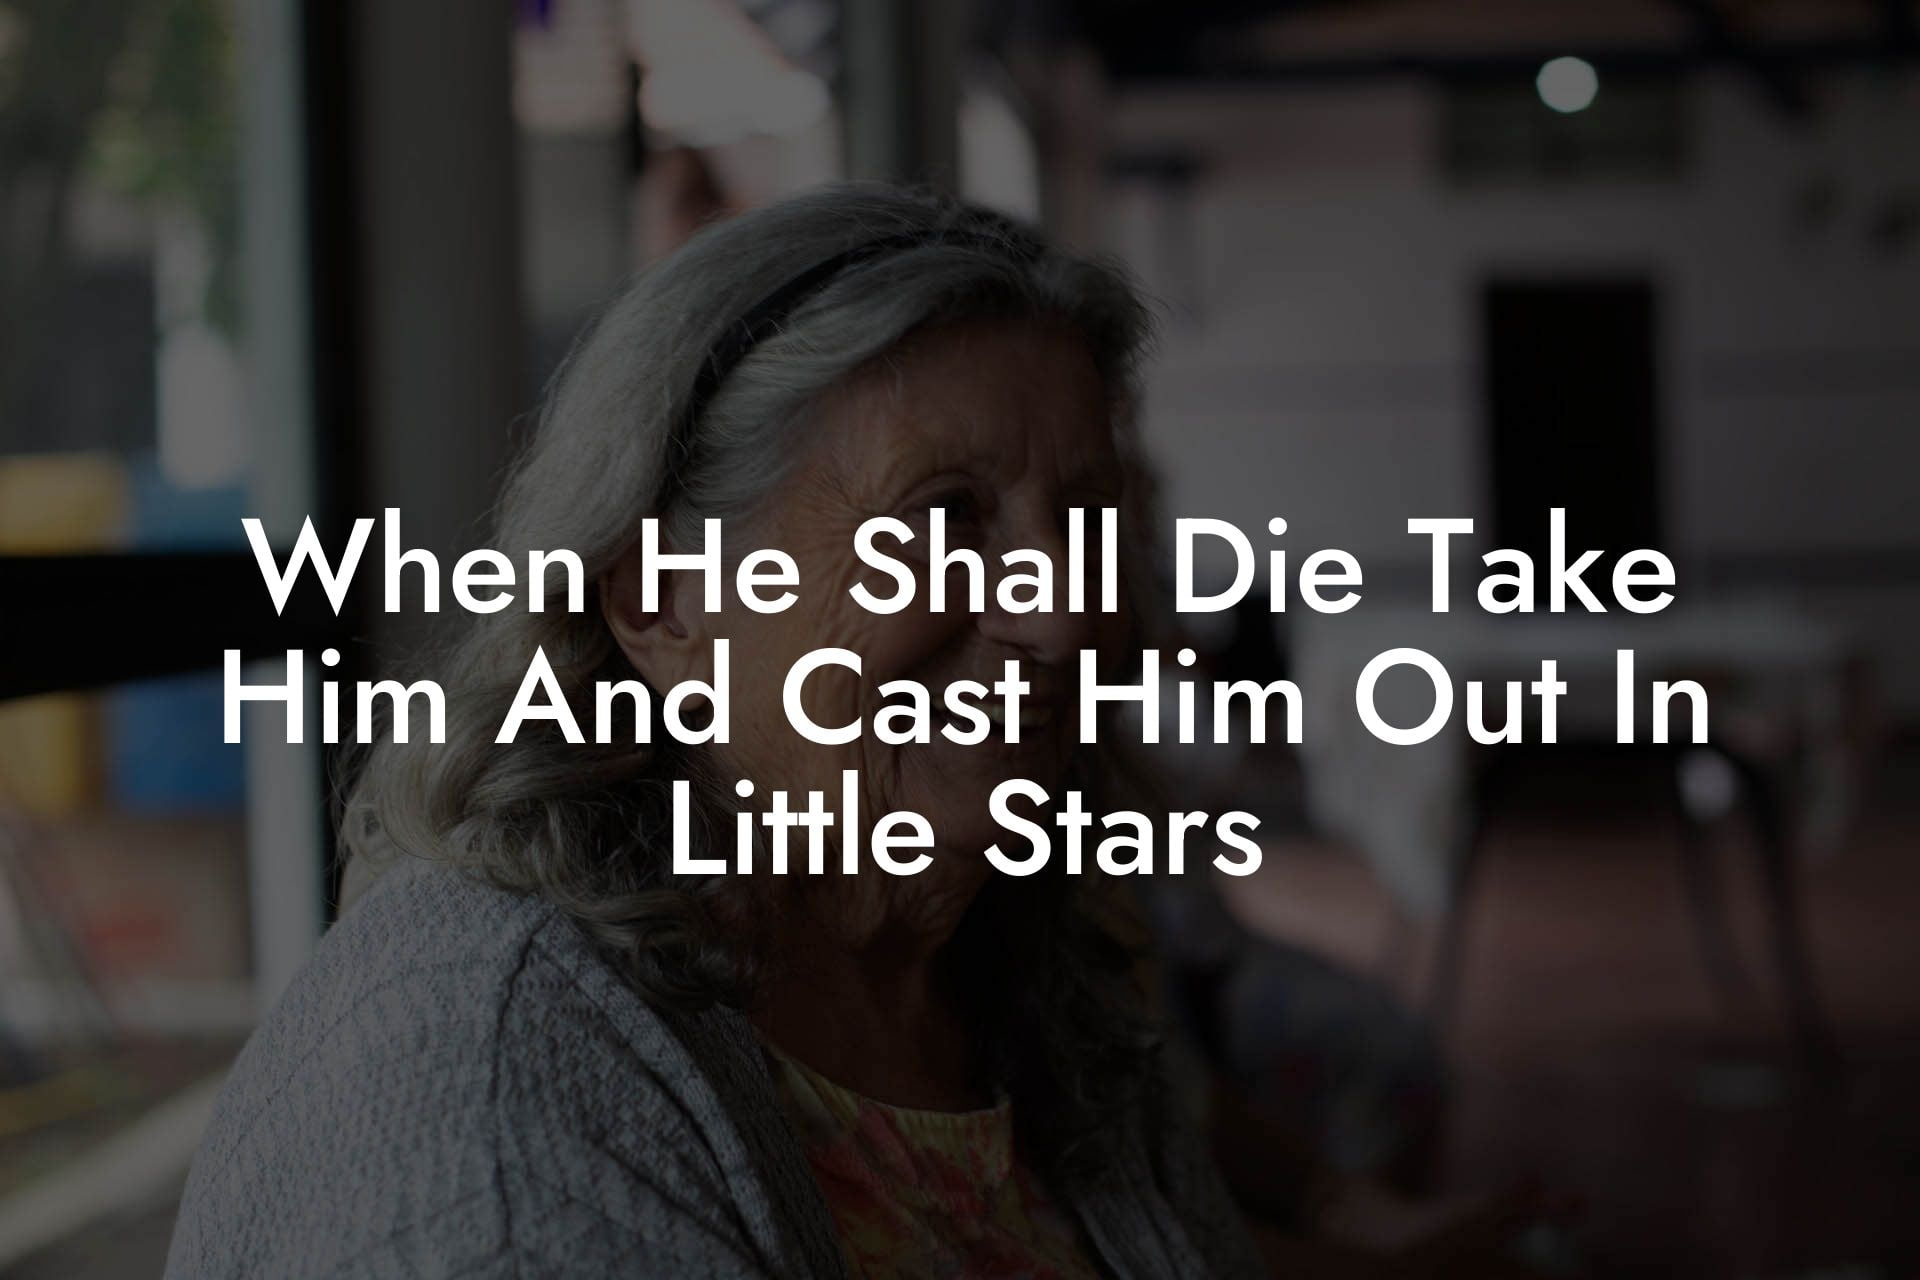 When He Shall Die Take Him And Cast Him Out In Little Stars